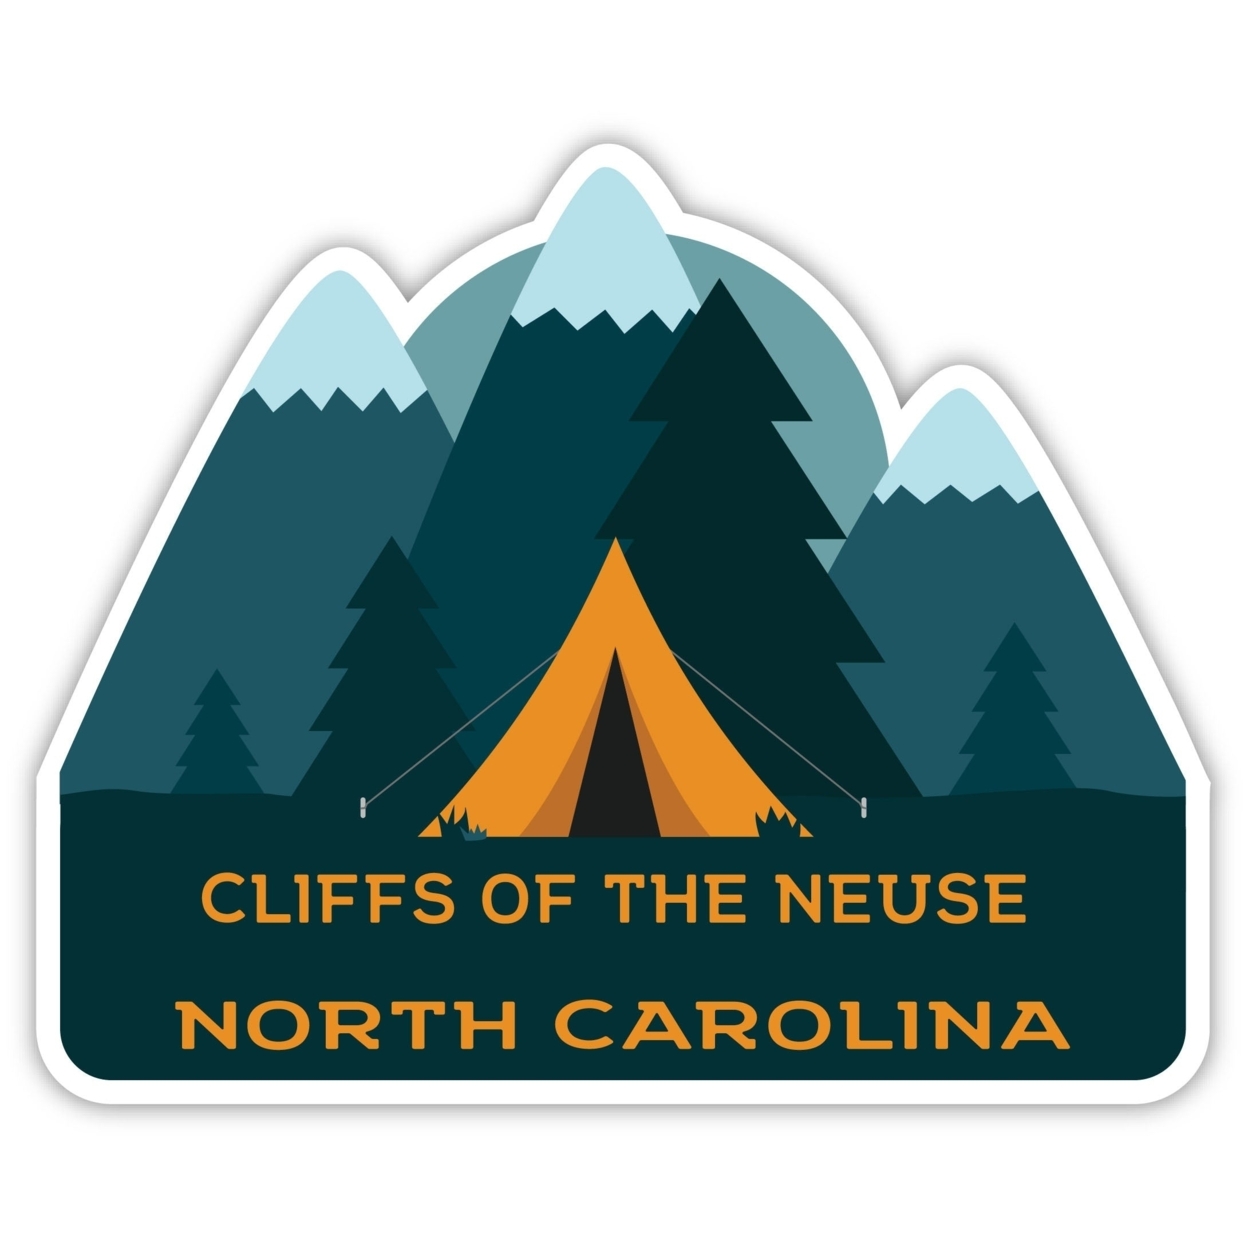 Cliffs Of The Neuse North Carolina Souvenir Decorative Stickers (Choose Theme And Size) - 4-Pack, 8-Inch, Tent